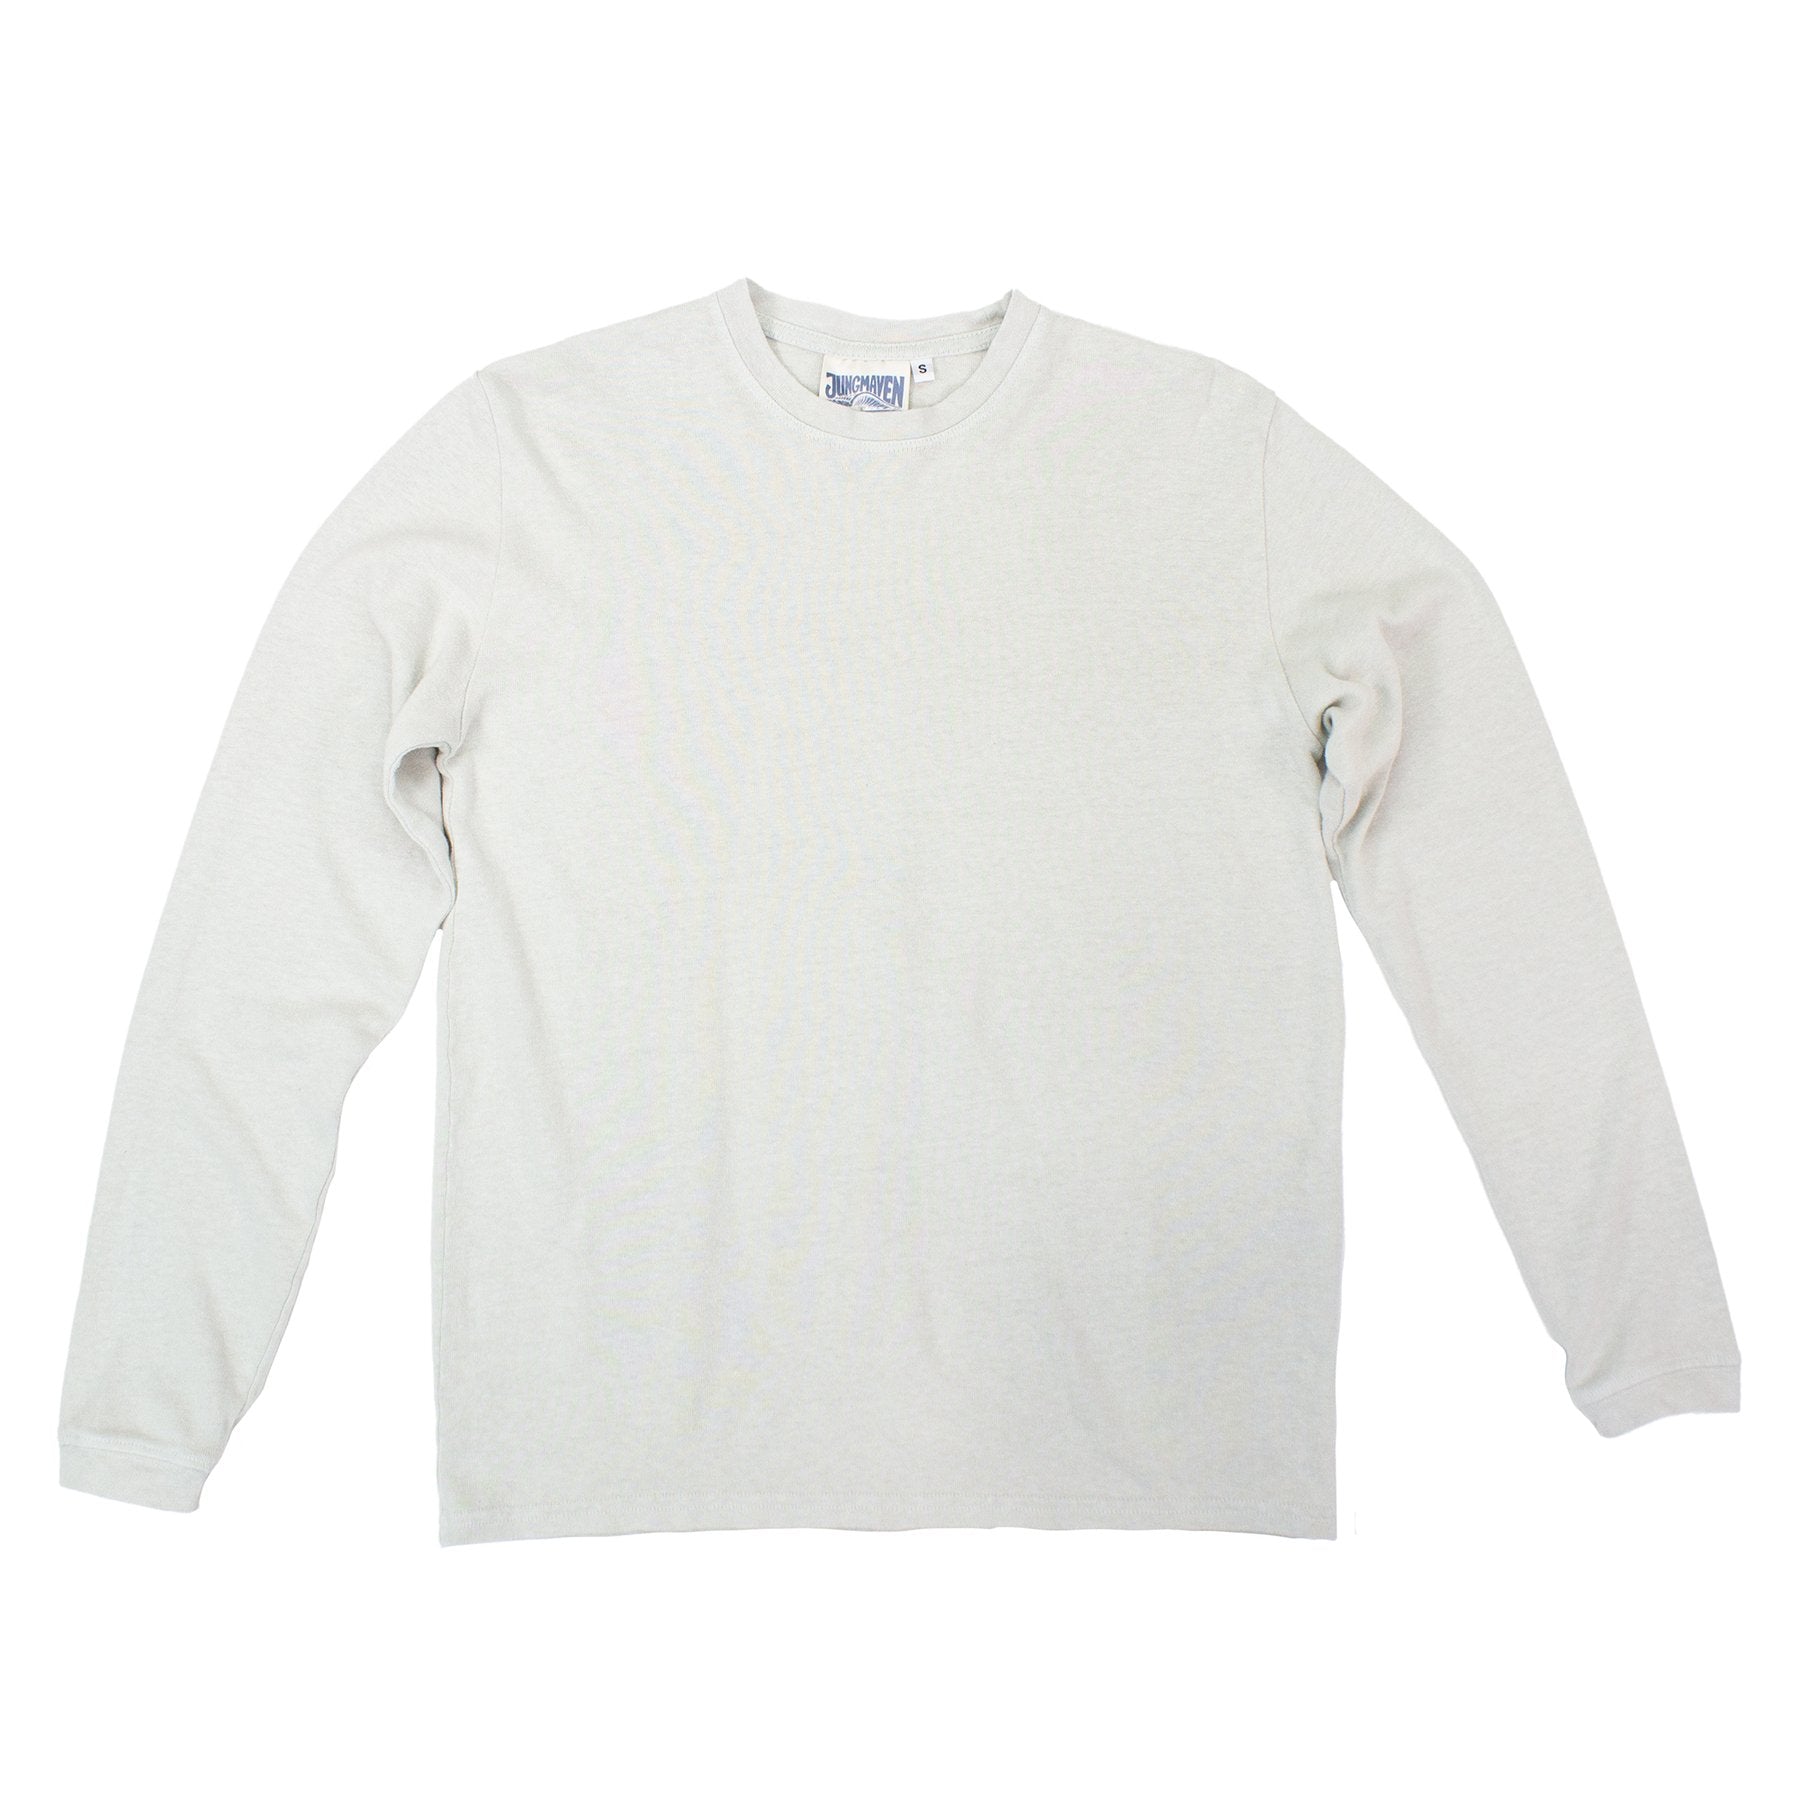 Baja long-sleeved tee in a hemp and organic cotton blend by Jungmaven in white